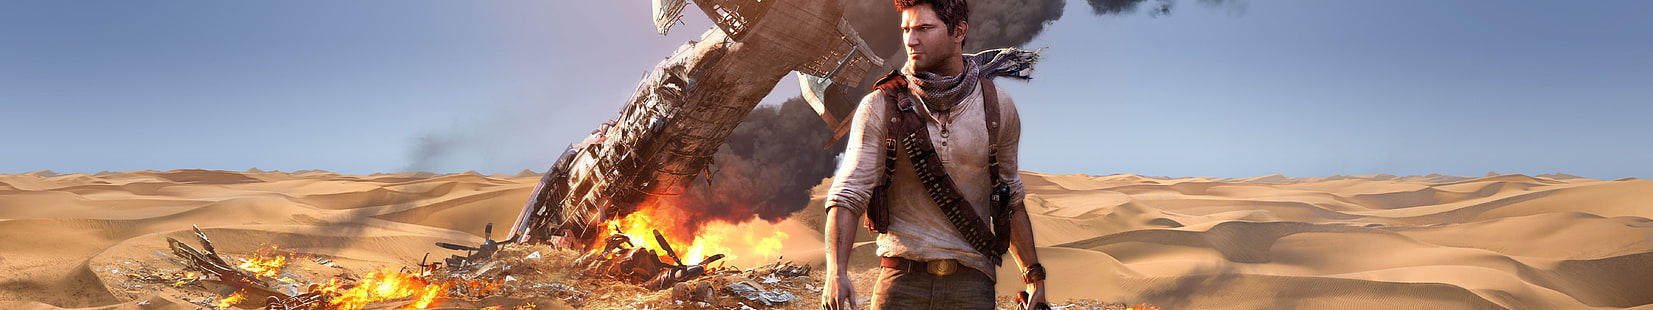 7680x1440 px uncharted Uncharted 3: Drakes Deception Entertainment Funny HD Art, Uncharted, 7680x1440 px, Uncharted 3: Drakes De, Tapety HD HD wallpaper